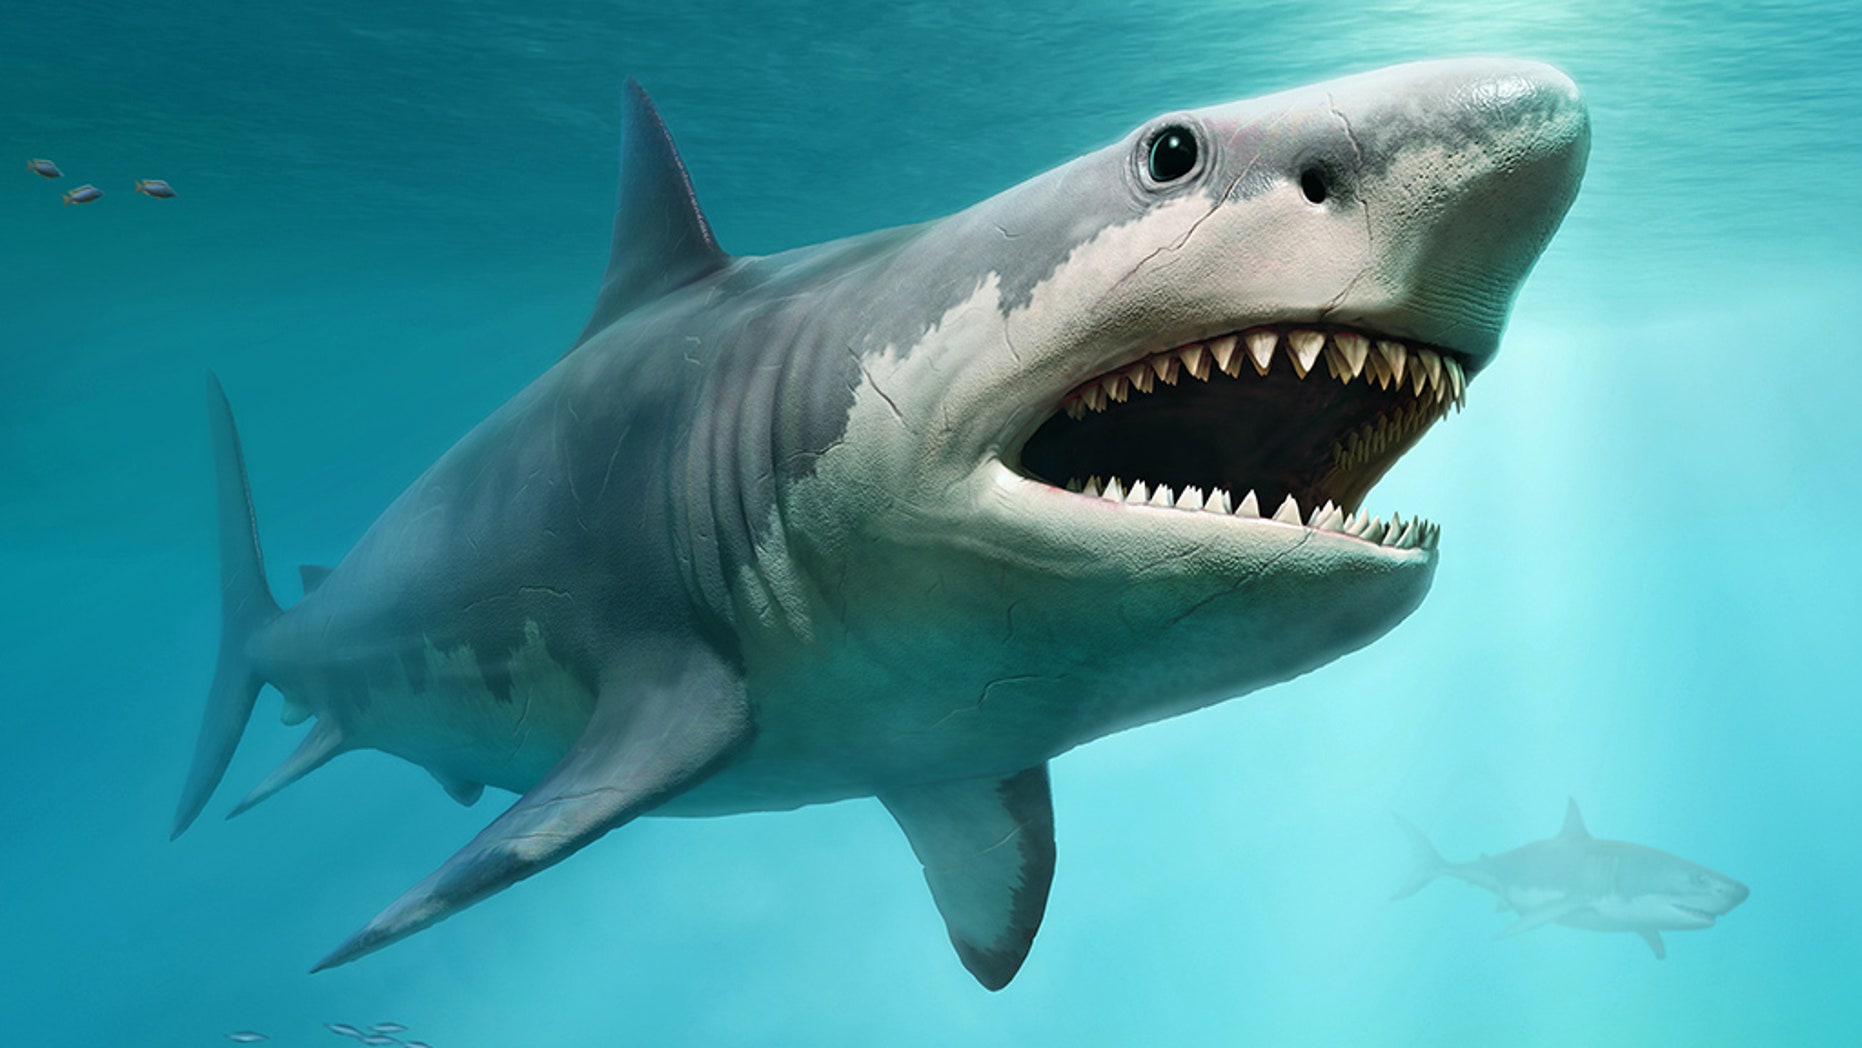 Megalodon may have been killed off by an exploding star Fox News